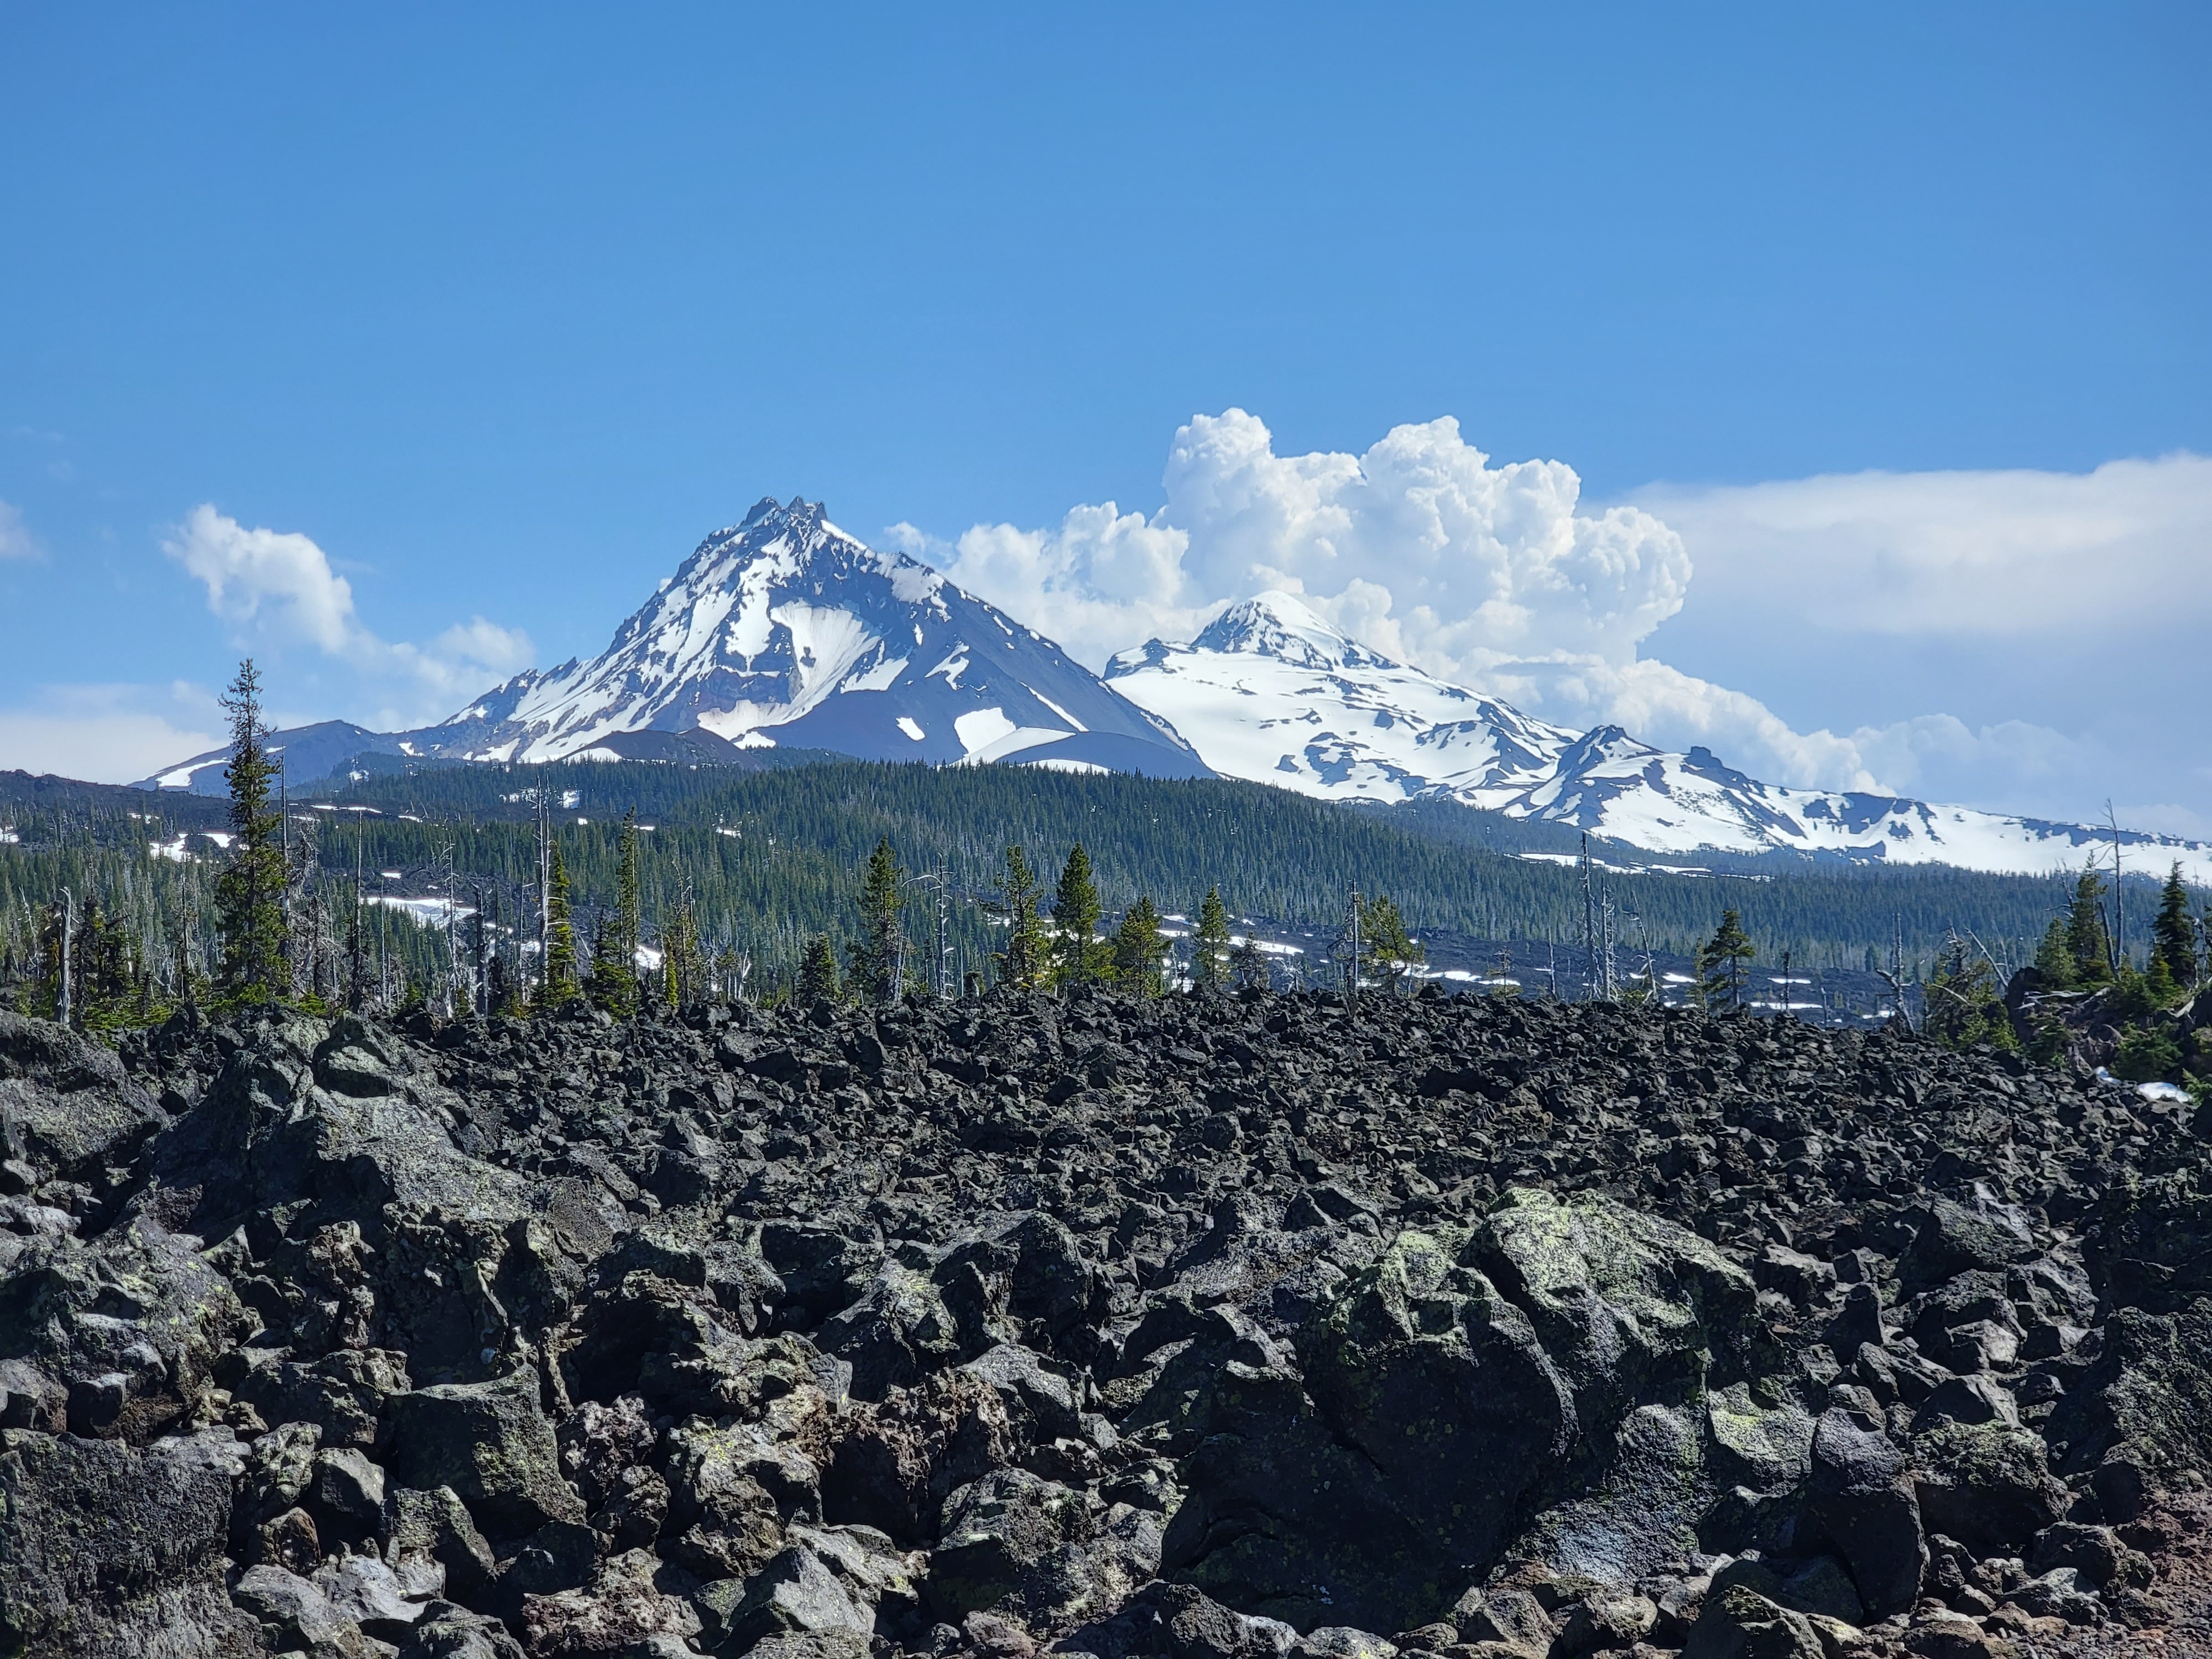 A picture of lavarock and mountains, with a blue sky in the background, taken from the top of the McKenzie Pass